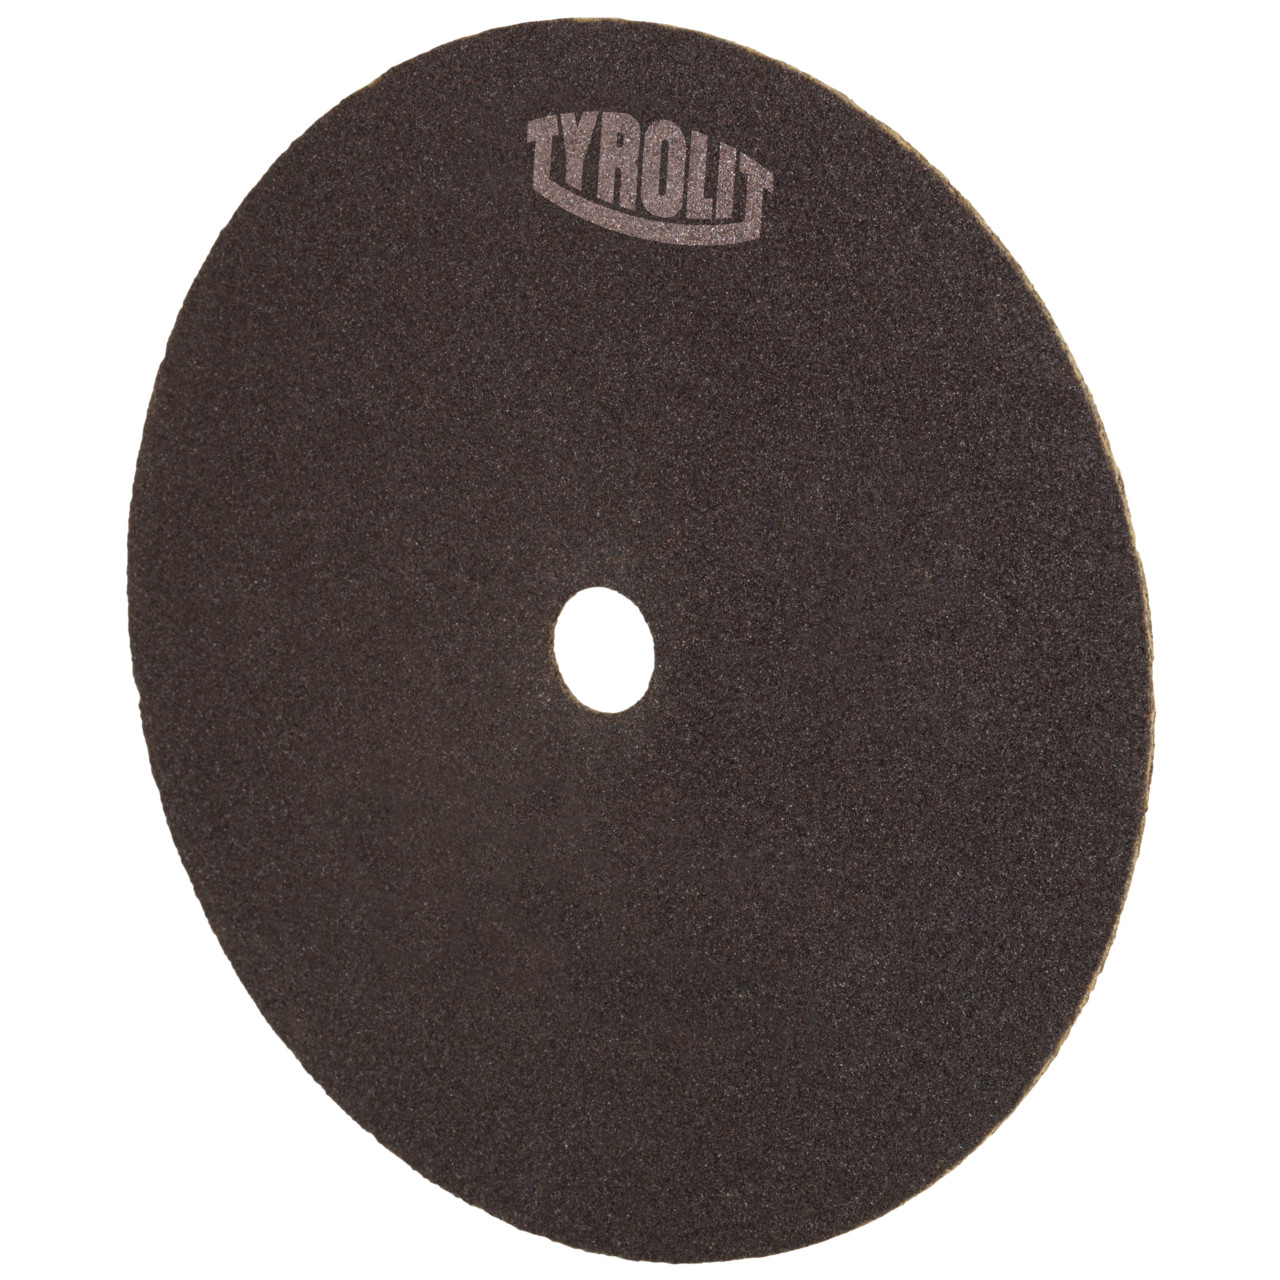 TYROLIT cut-off wheel for cutting and saw sharpening DxDxH 300x2x32 For steel and HSS, shape: 41N - straight version (non-woven cut-off wheel), Art. 60572